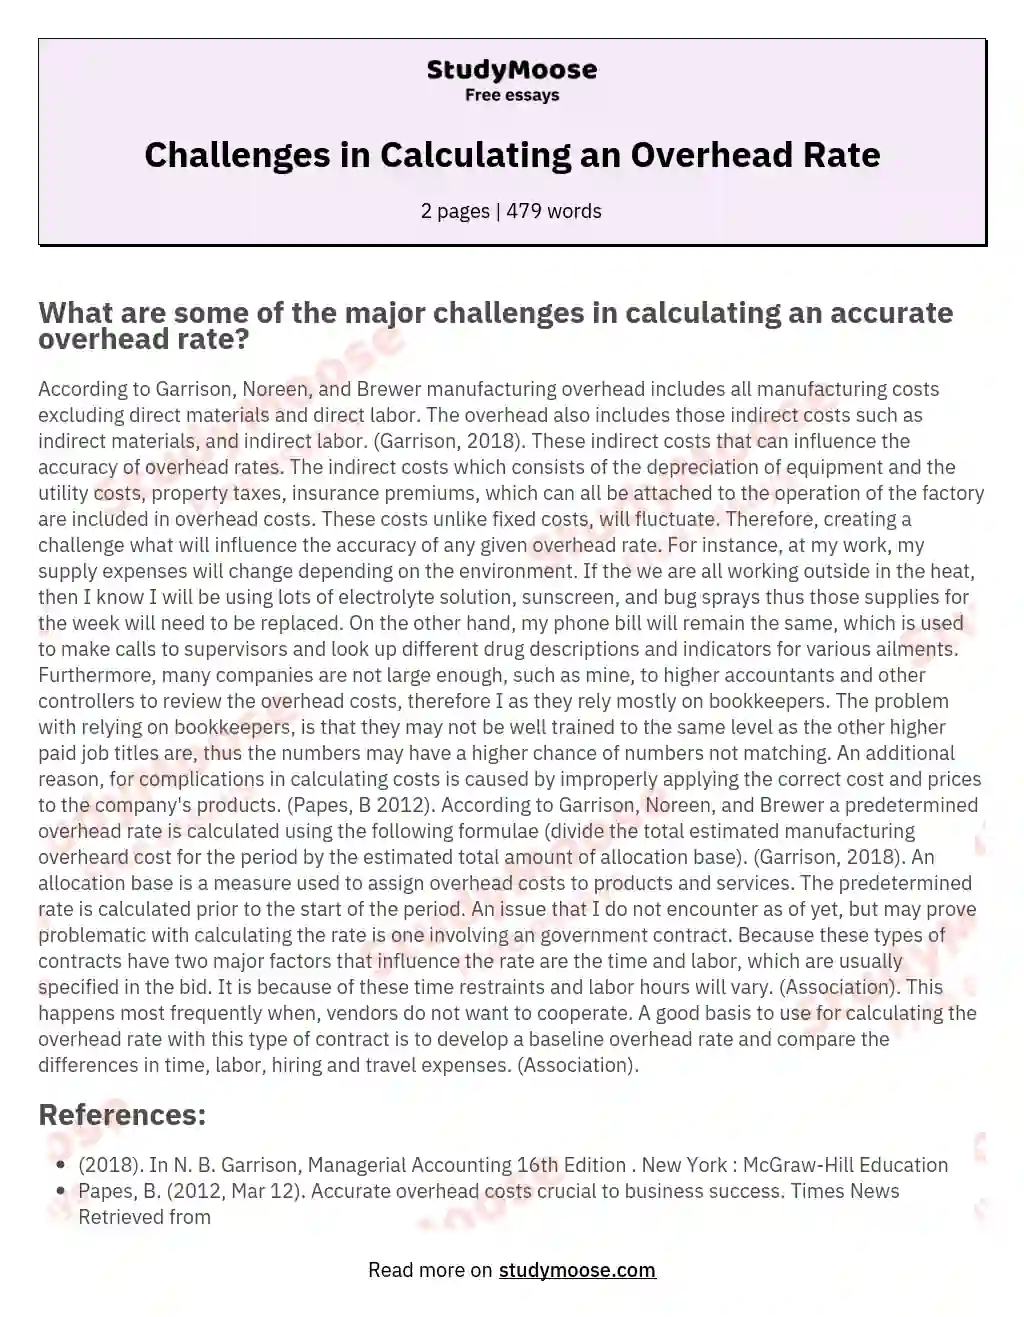 Challenges in Calculating an Overhead Rate essay